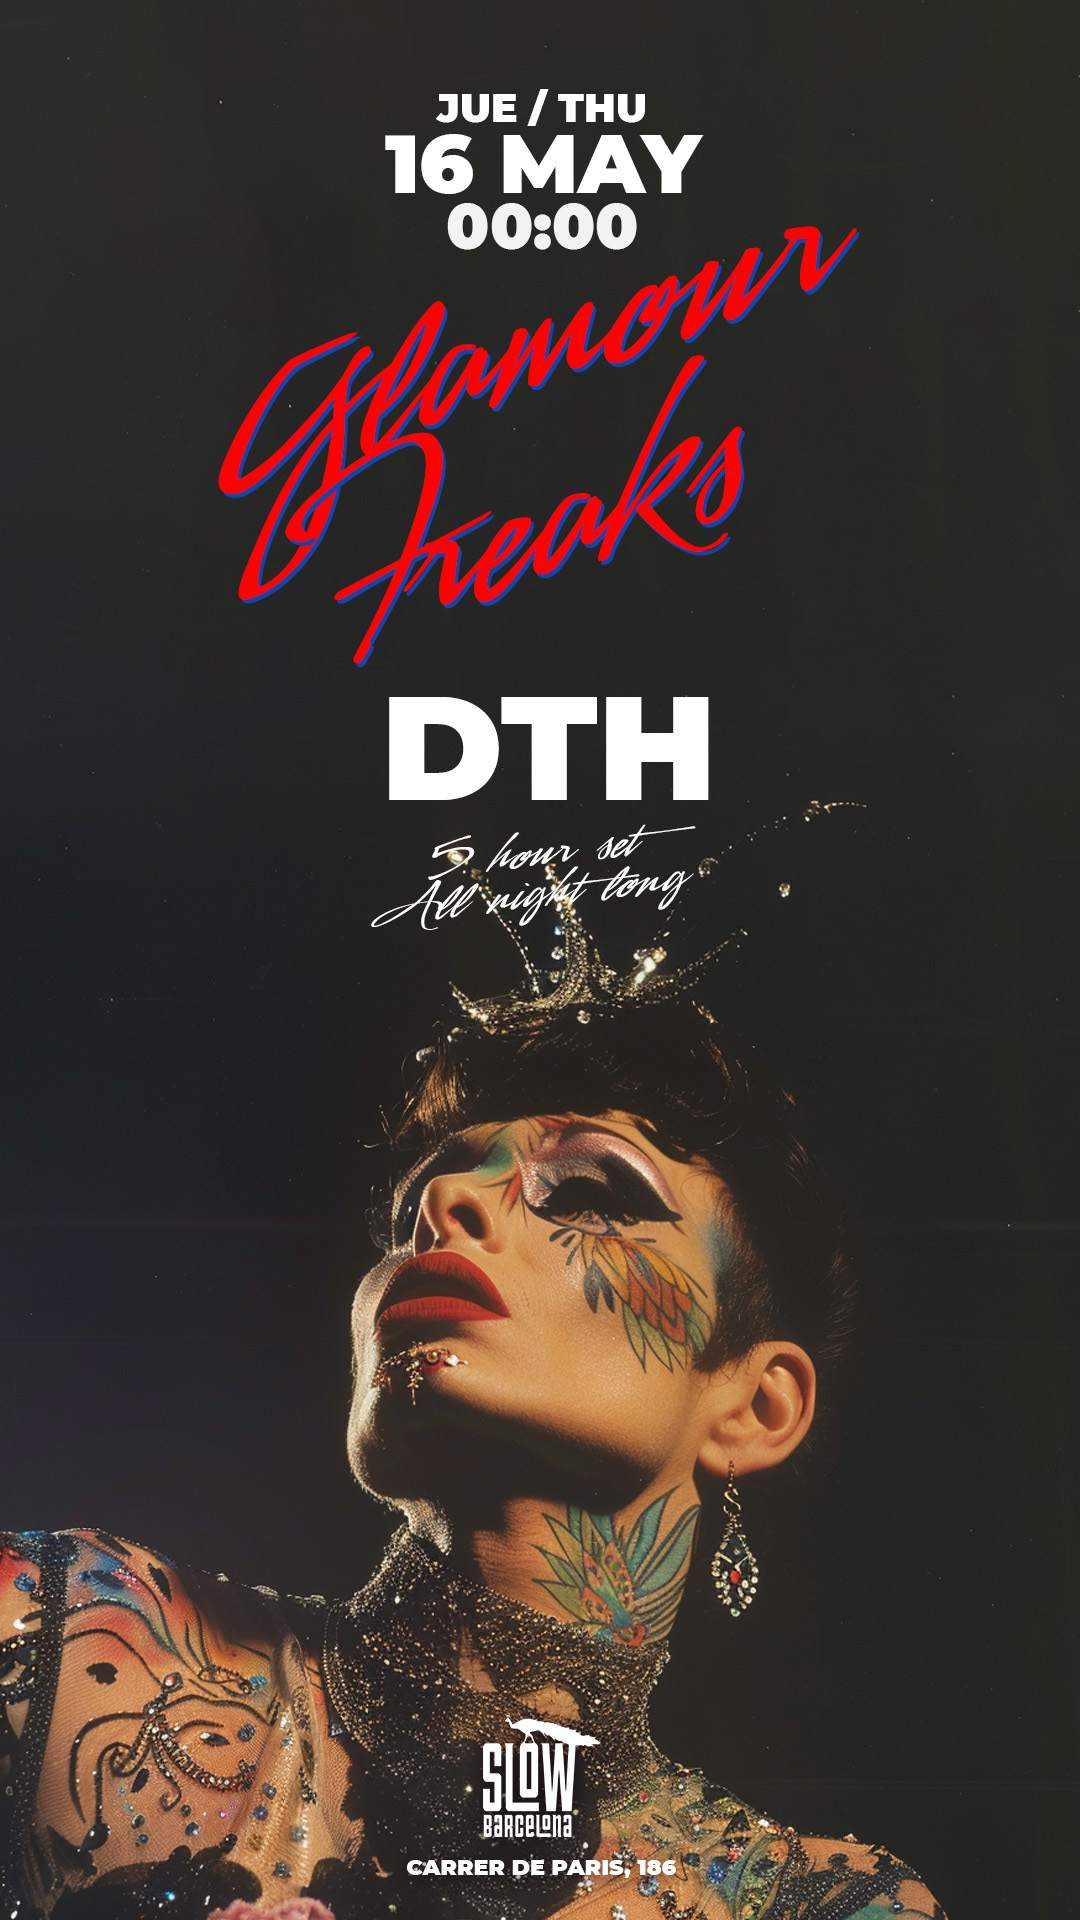 [Free till 1:30] Glamour Freaks by D.T.H. (all night long) - Página trasera